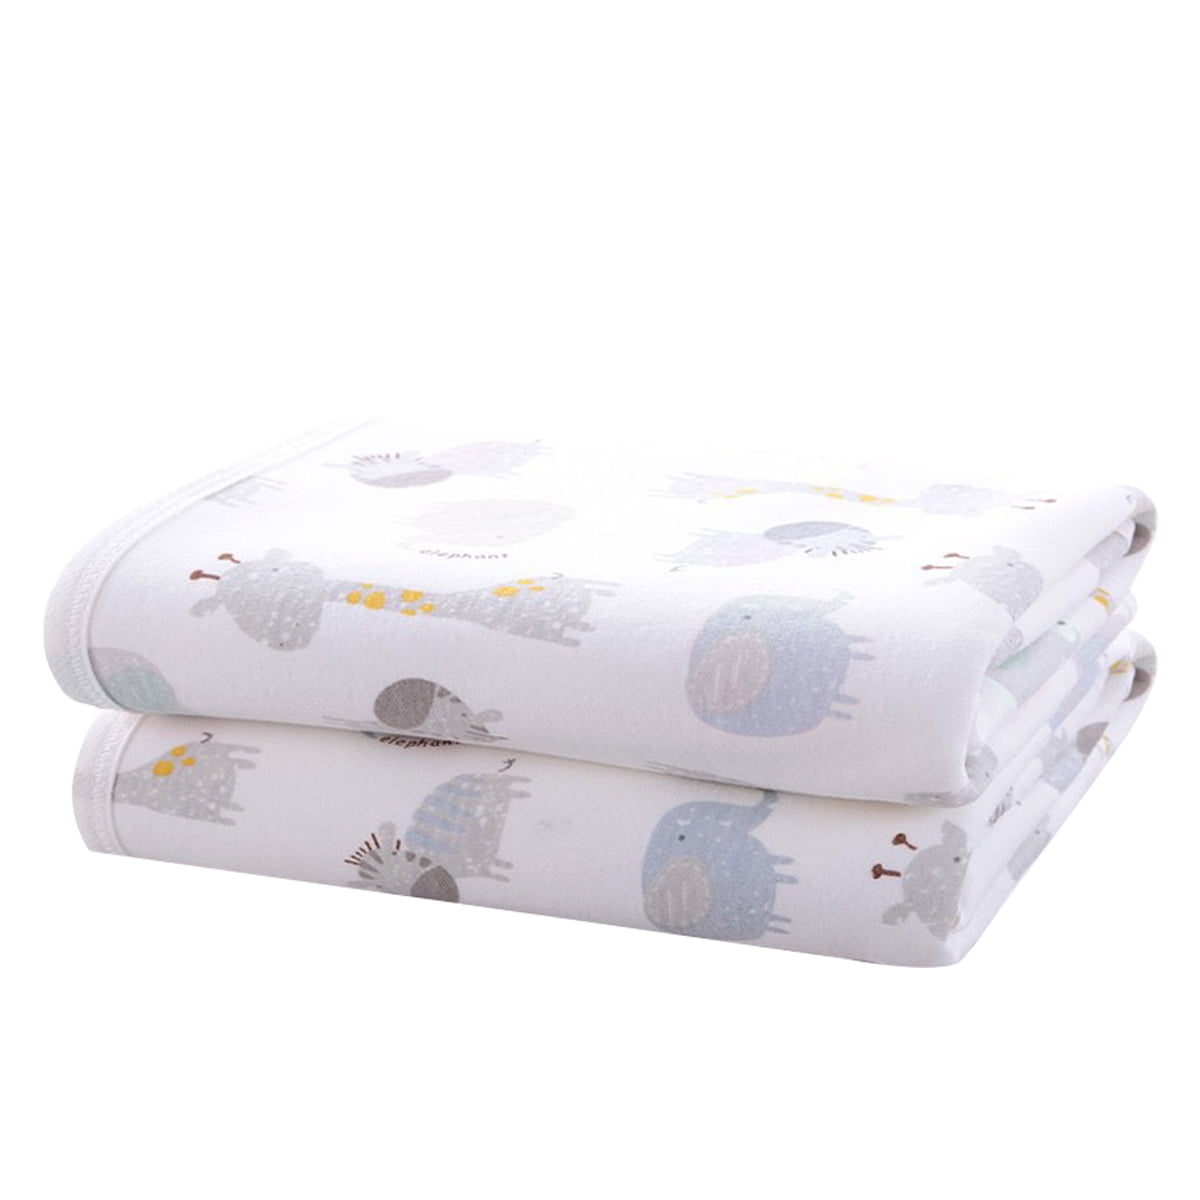 Back Packers Diaper Changing Pad 3 pcs Ecological Cotton Breathable Multi-Function Waterproof Changing Pads Washable Resuable Diapers Liners Mat